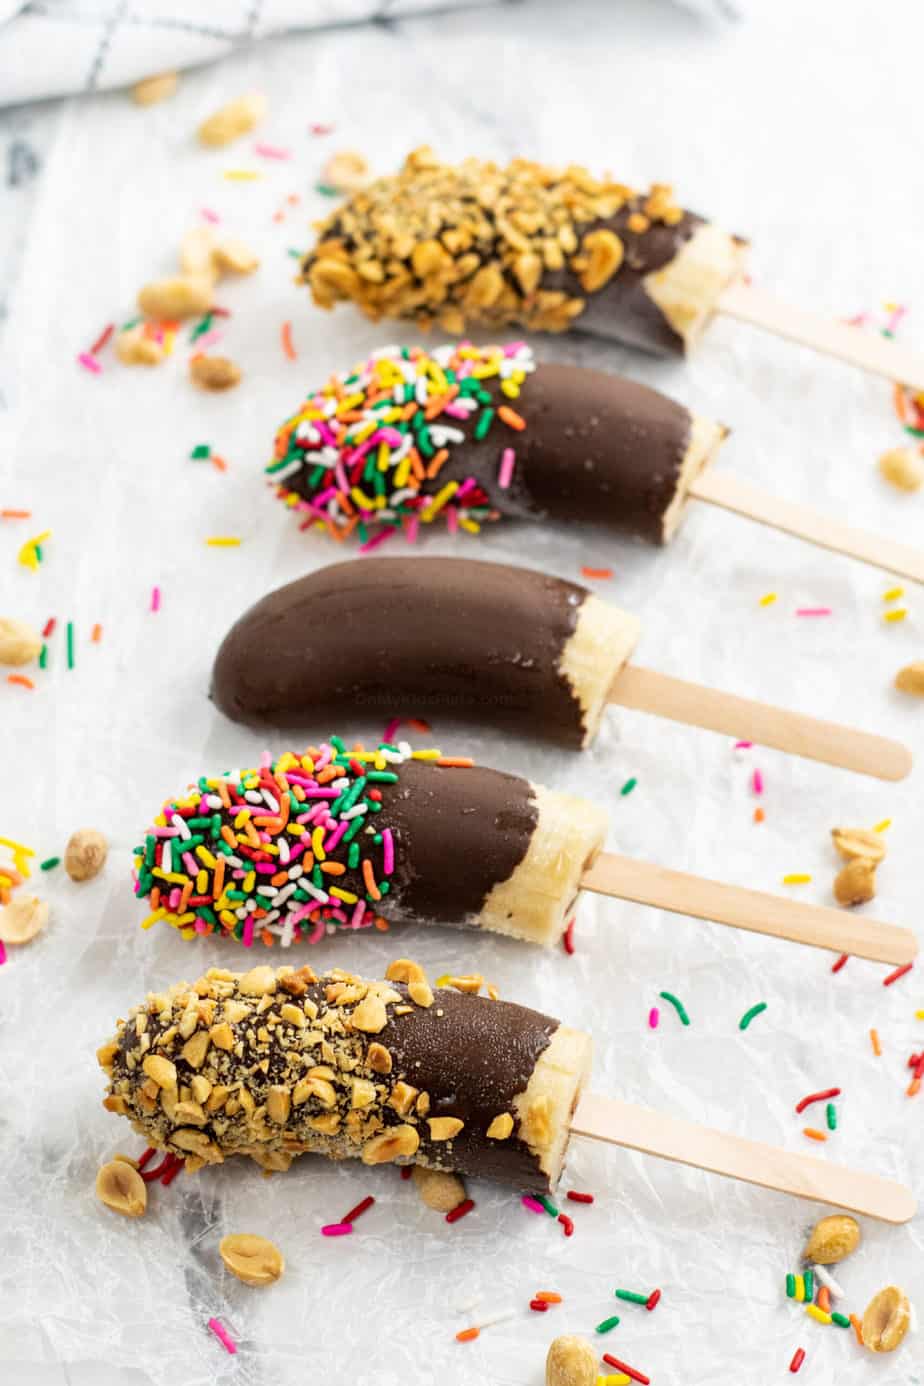 Frozen banana popsicles lined up on wax paper topped with nuts and sprinkles